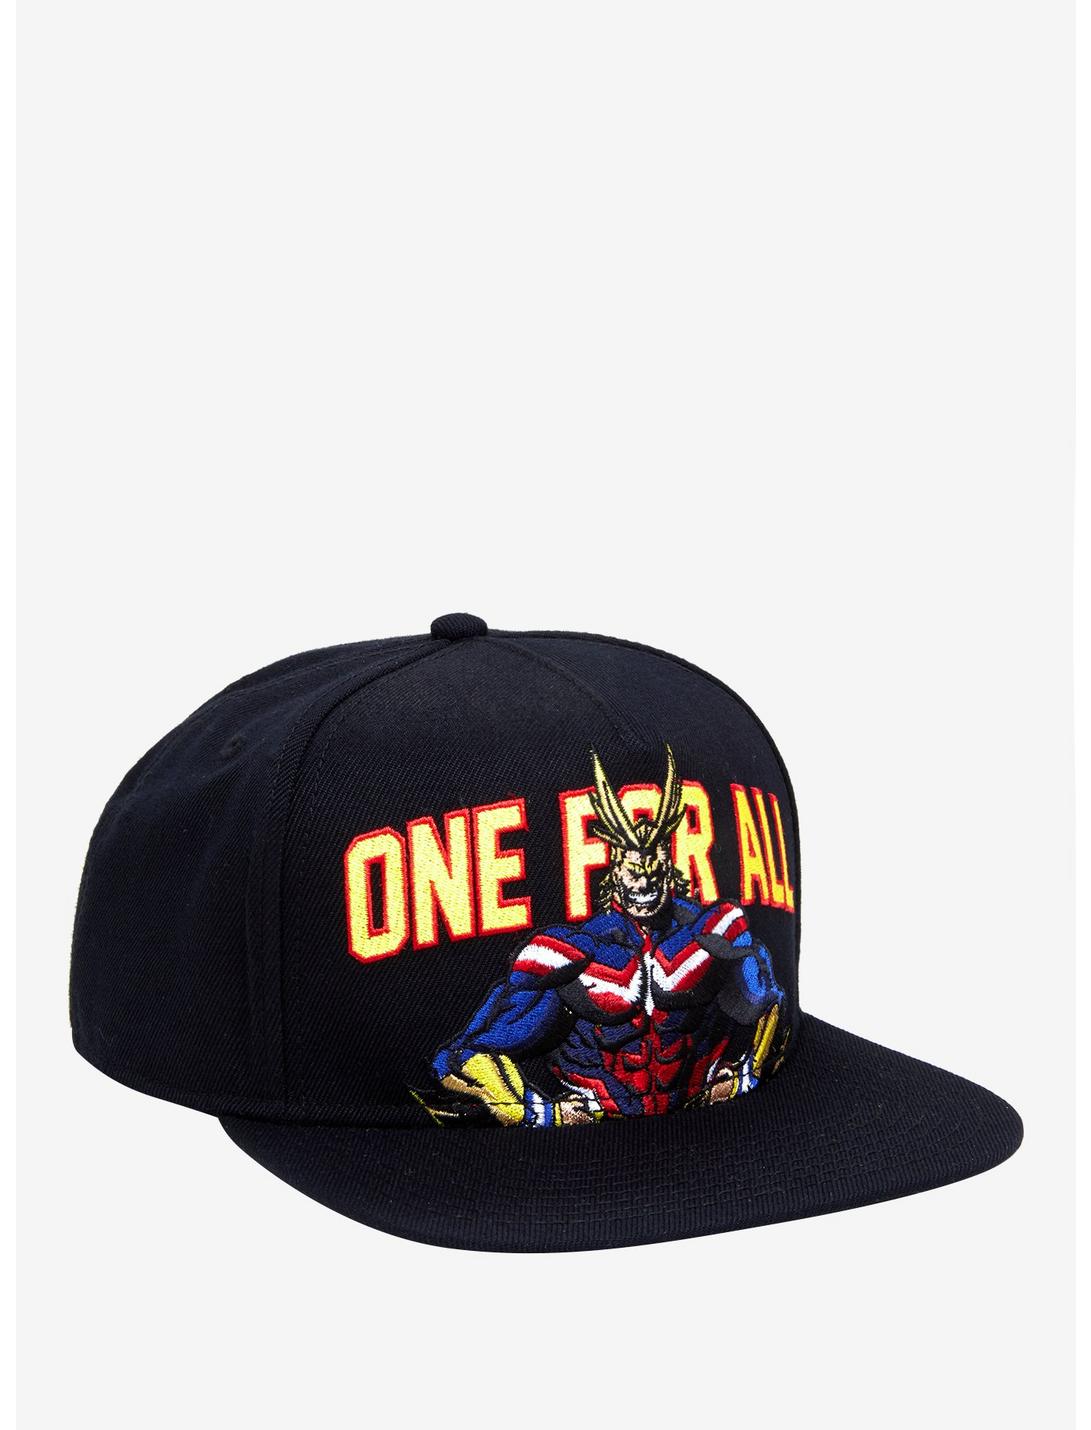 My Hero Academia One For All Snapback Hat, , hi-res